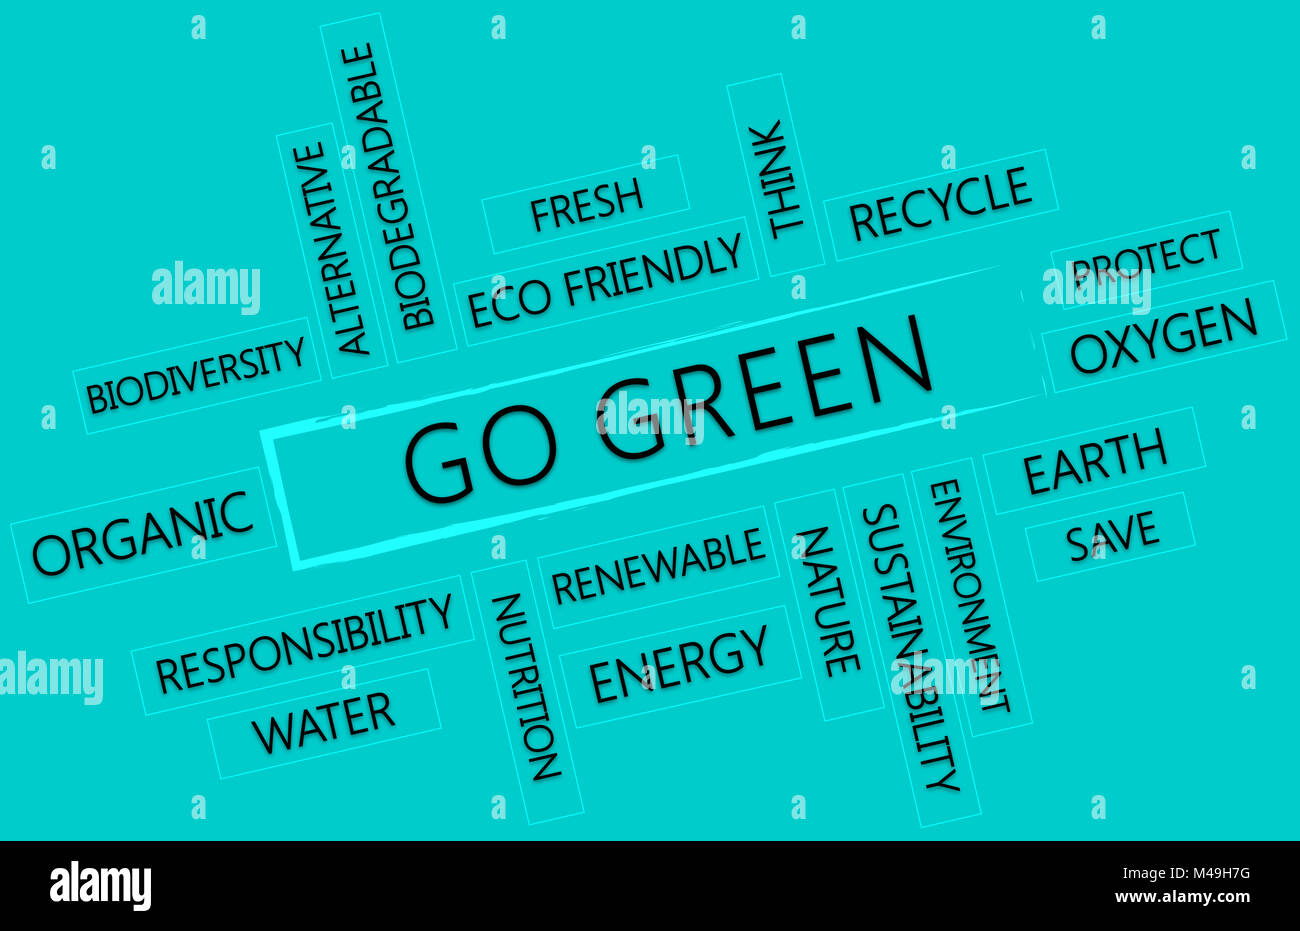 GO GREEN. Conceptual word cloud on aqua green background with black letters Stock Photo